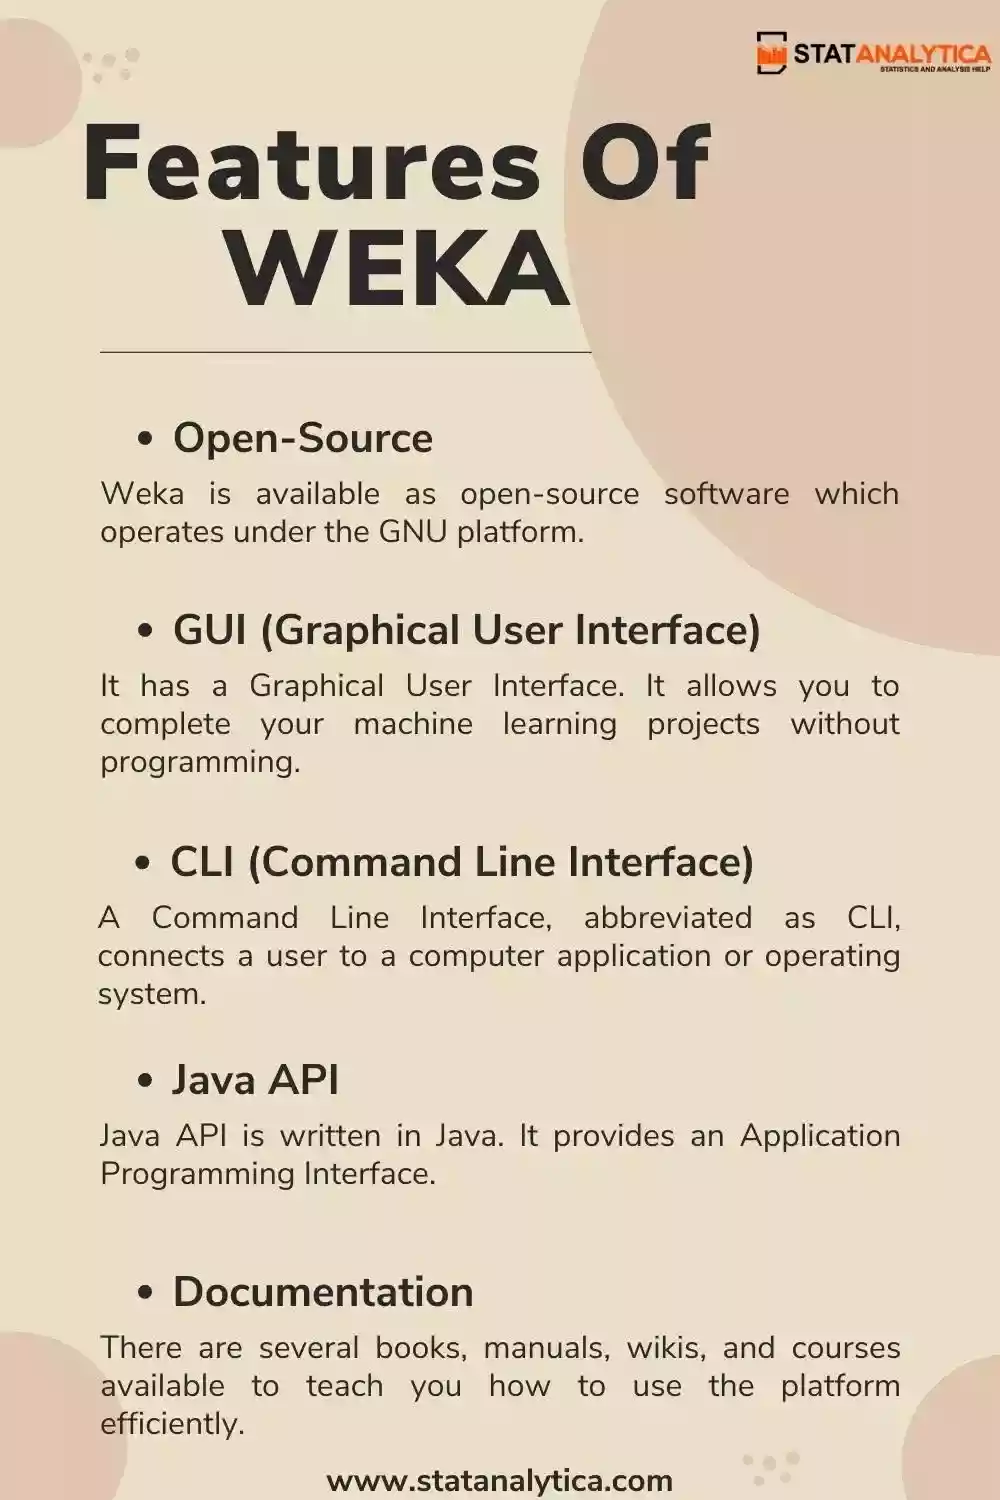 features of WEKA